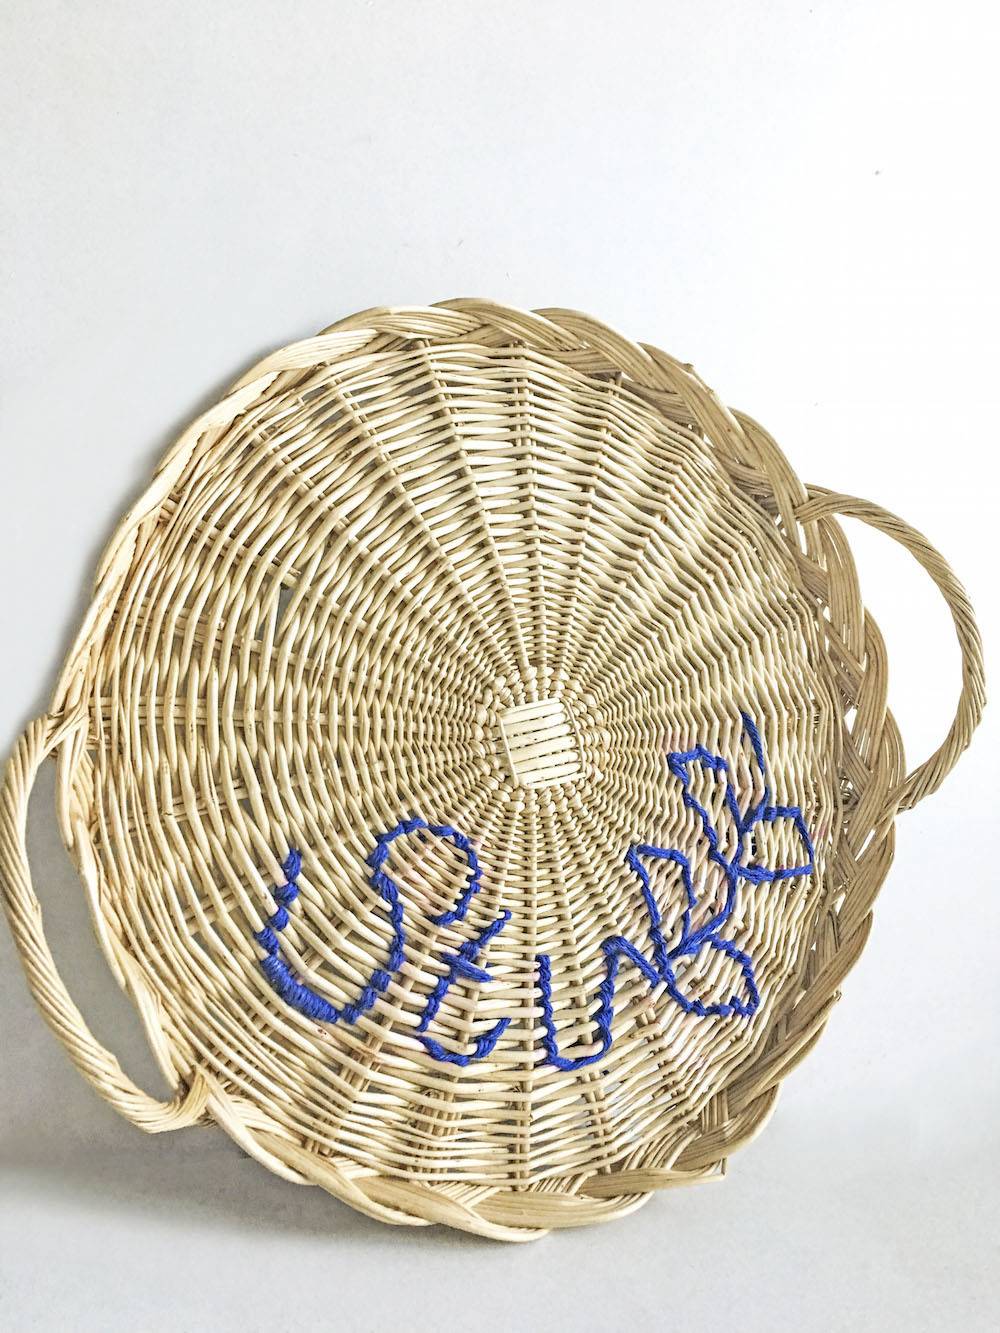 Make It: Upcycle a Thrift Store Basket With Yarn